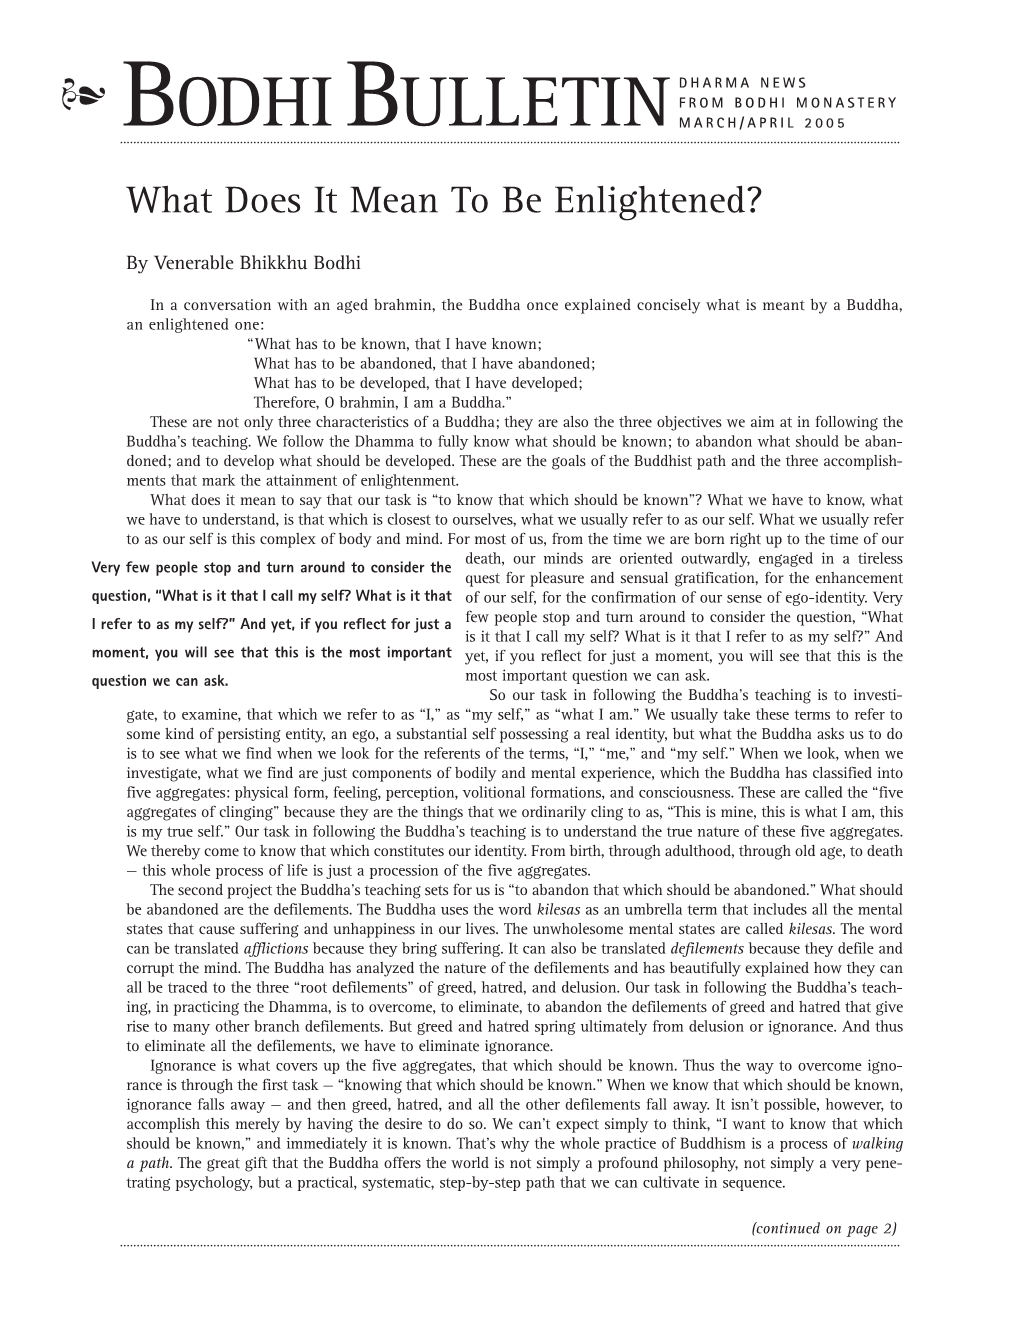 What Does It Mean to Be Enlightened?